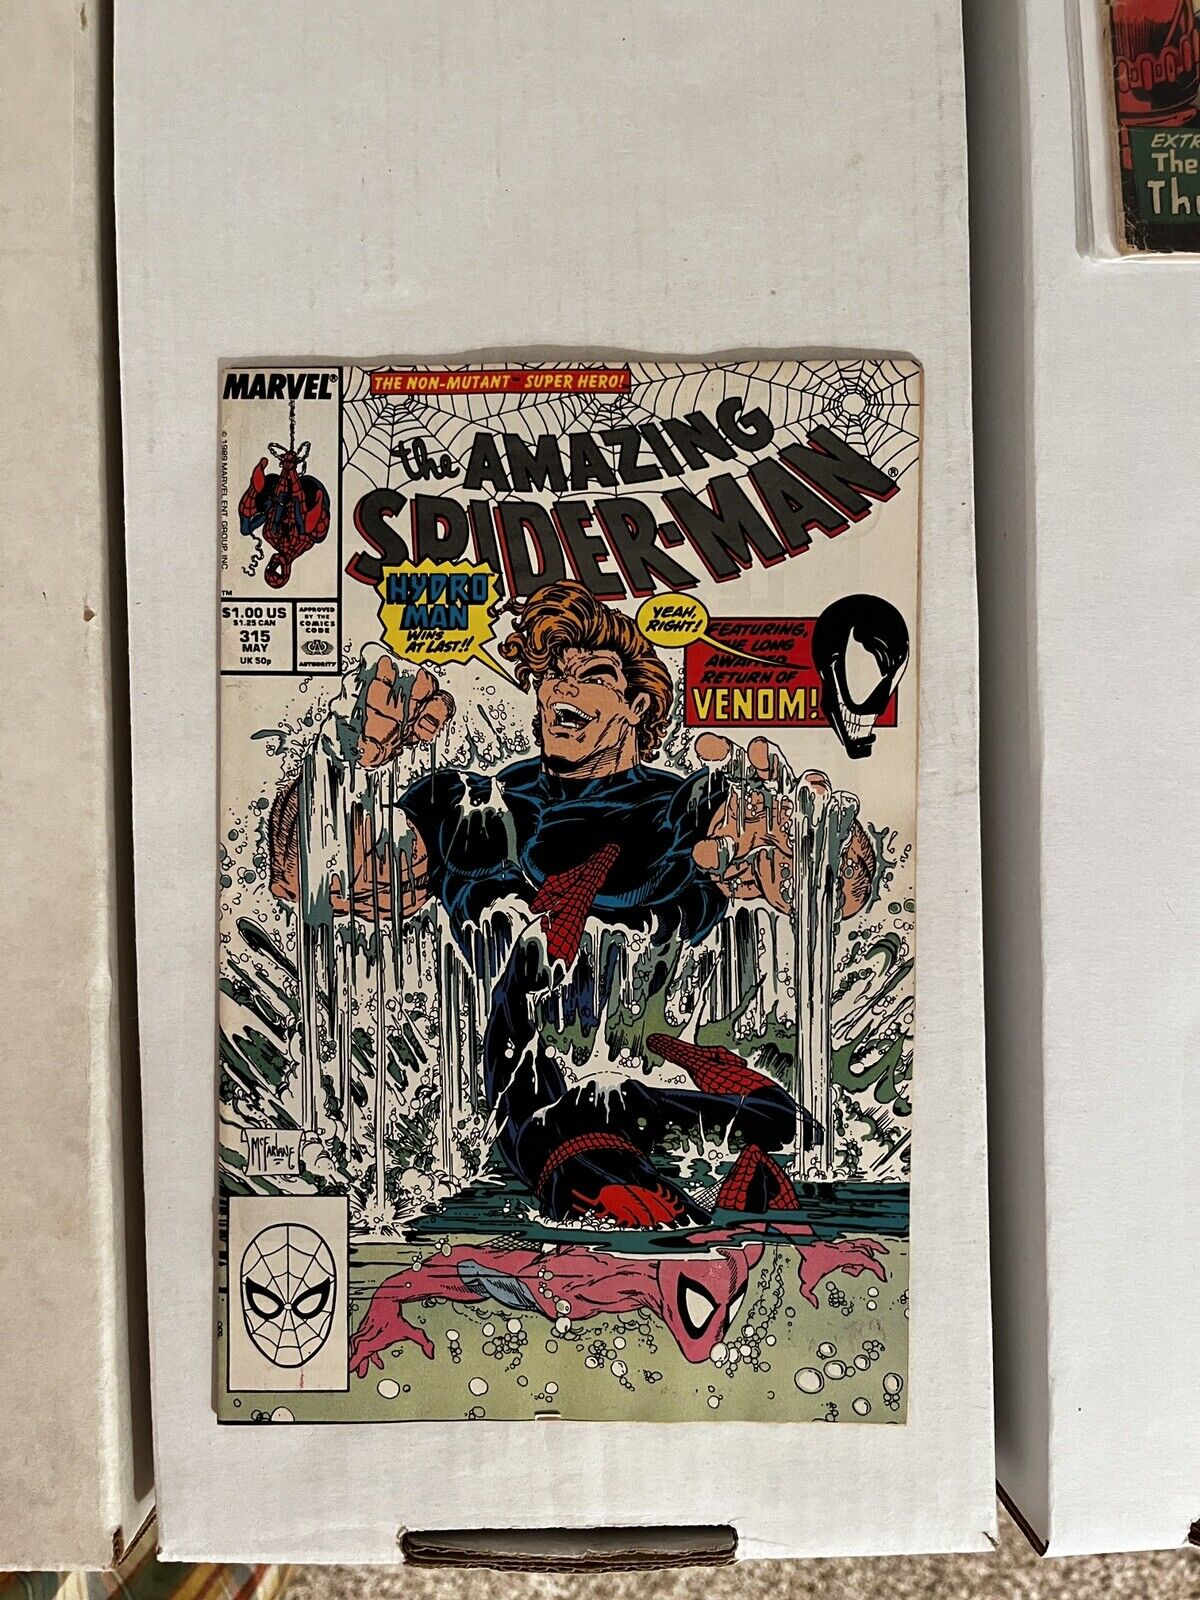 The Amazing Spider-Man #315 Marvel 1st Print Todd McFarlane 1st Cover 2nd App